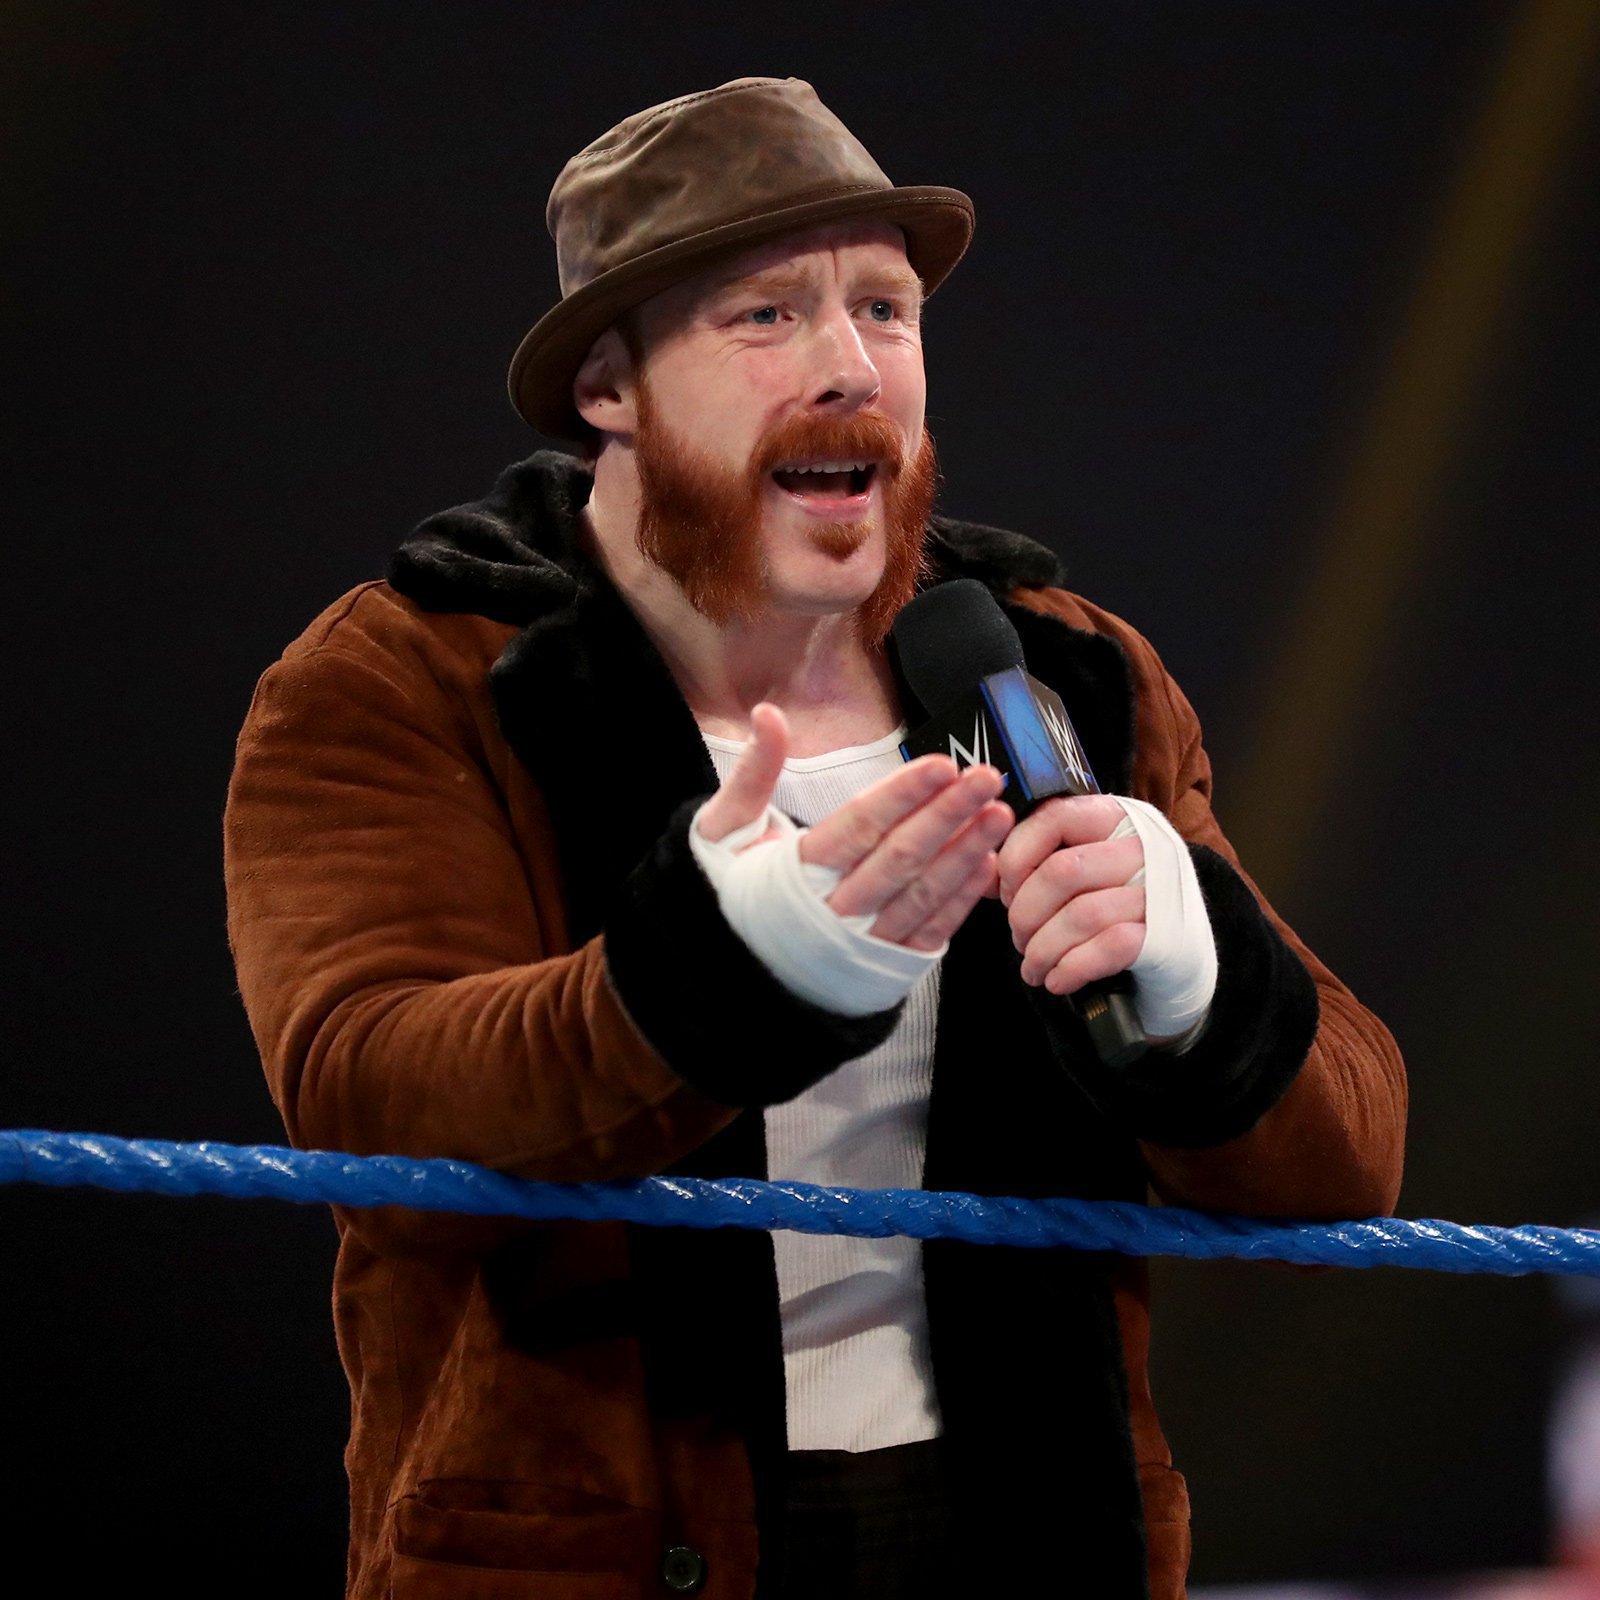 Sheamus Explained Why The Mohawk Had To Go, WWE's Idea For A New Look